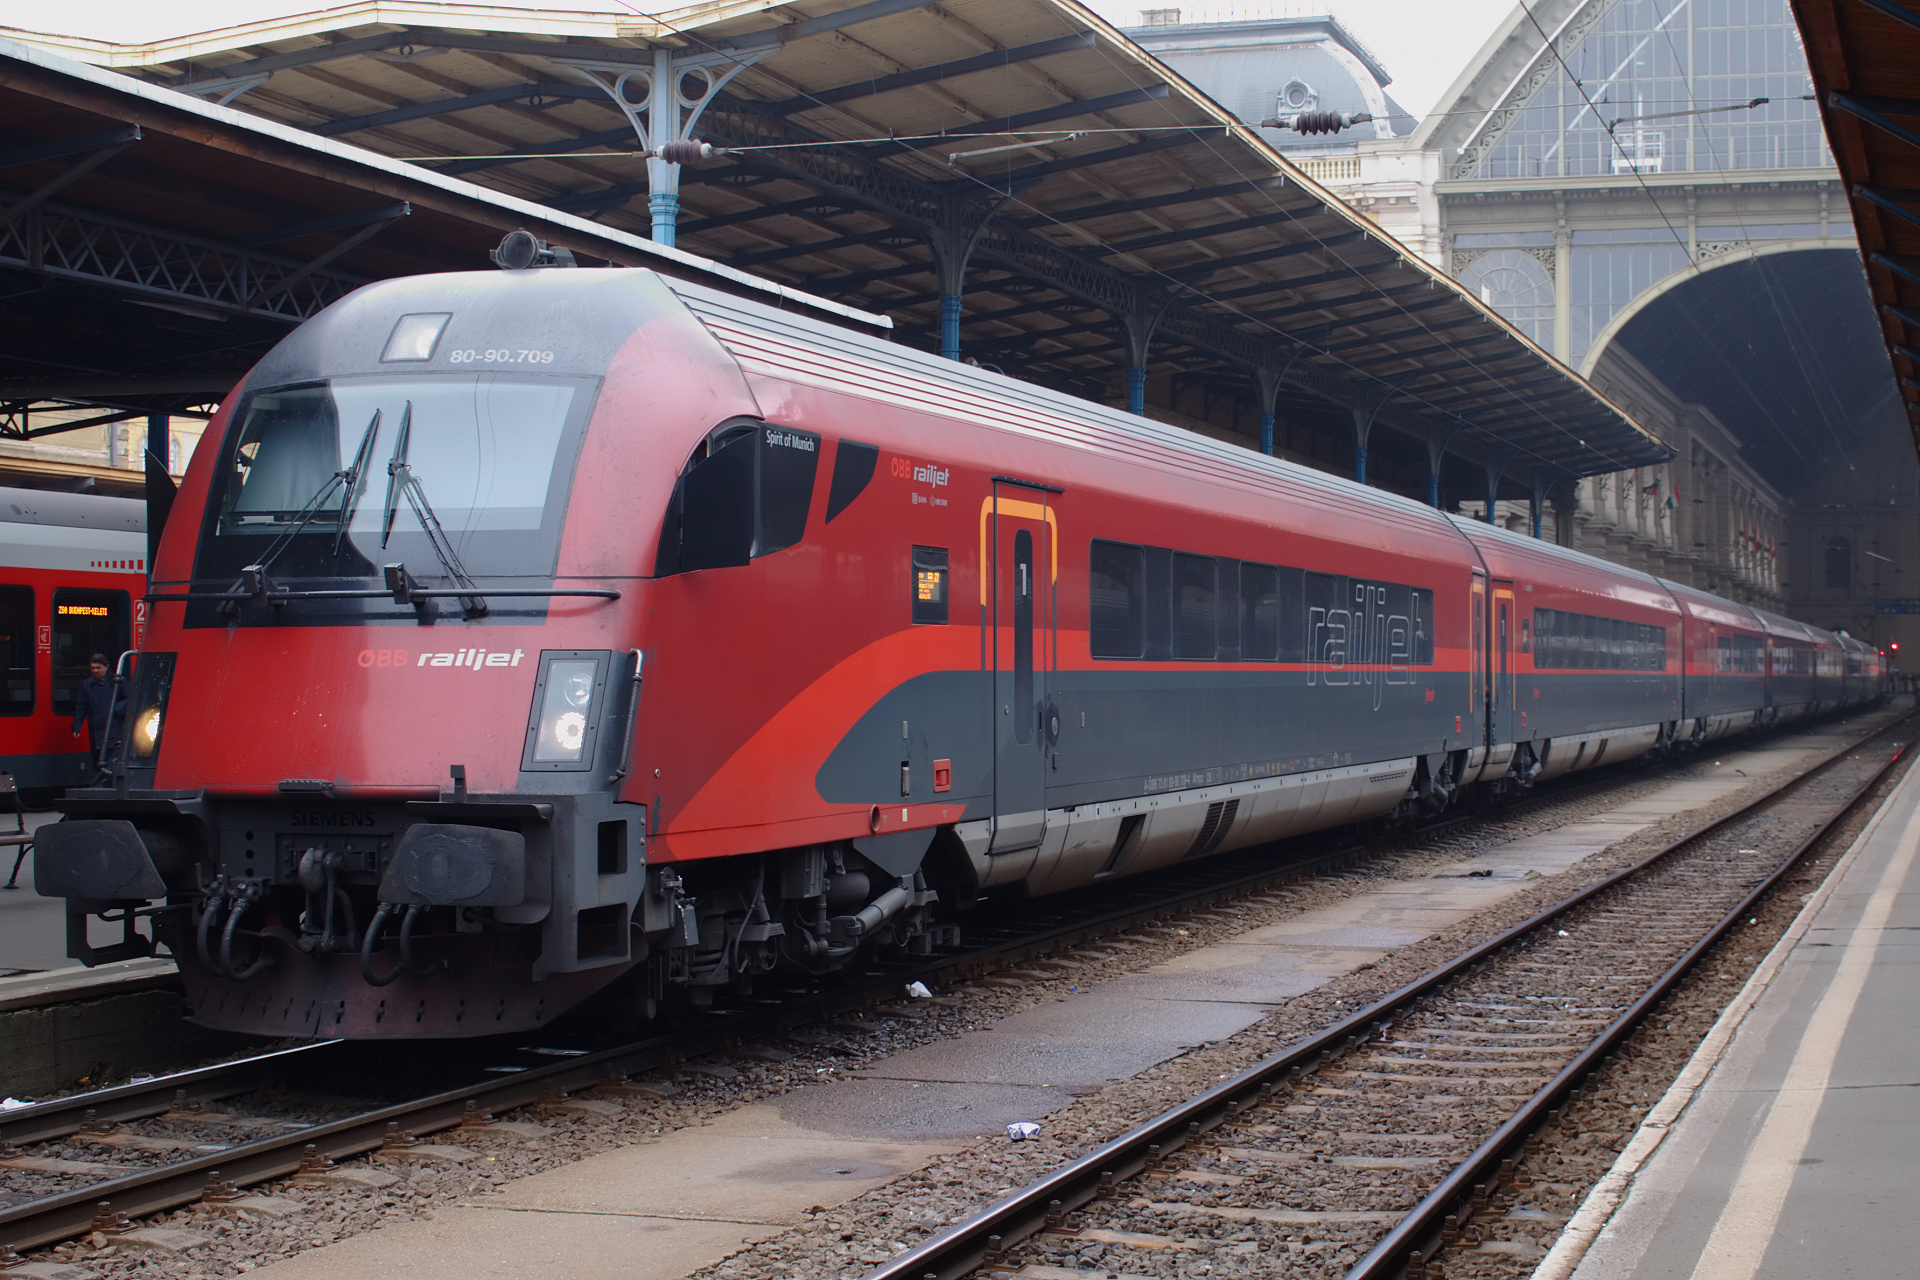 Siemens Afmpz 80-90.7 (Travels » Budapest » Vehicles » Trains and Locomotives)